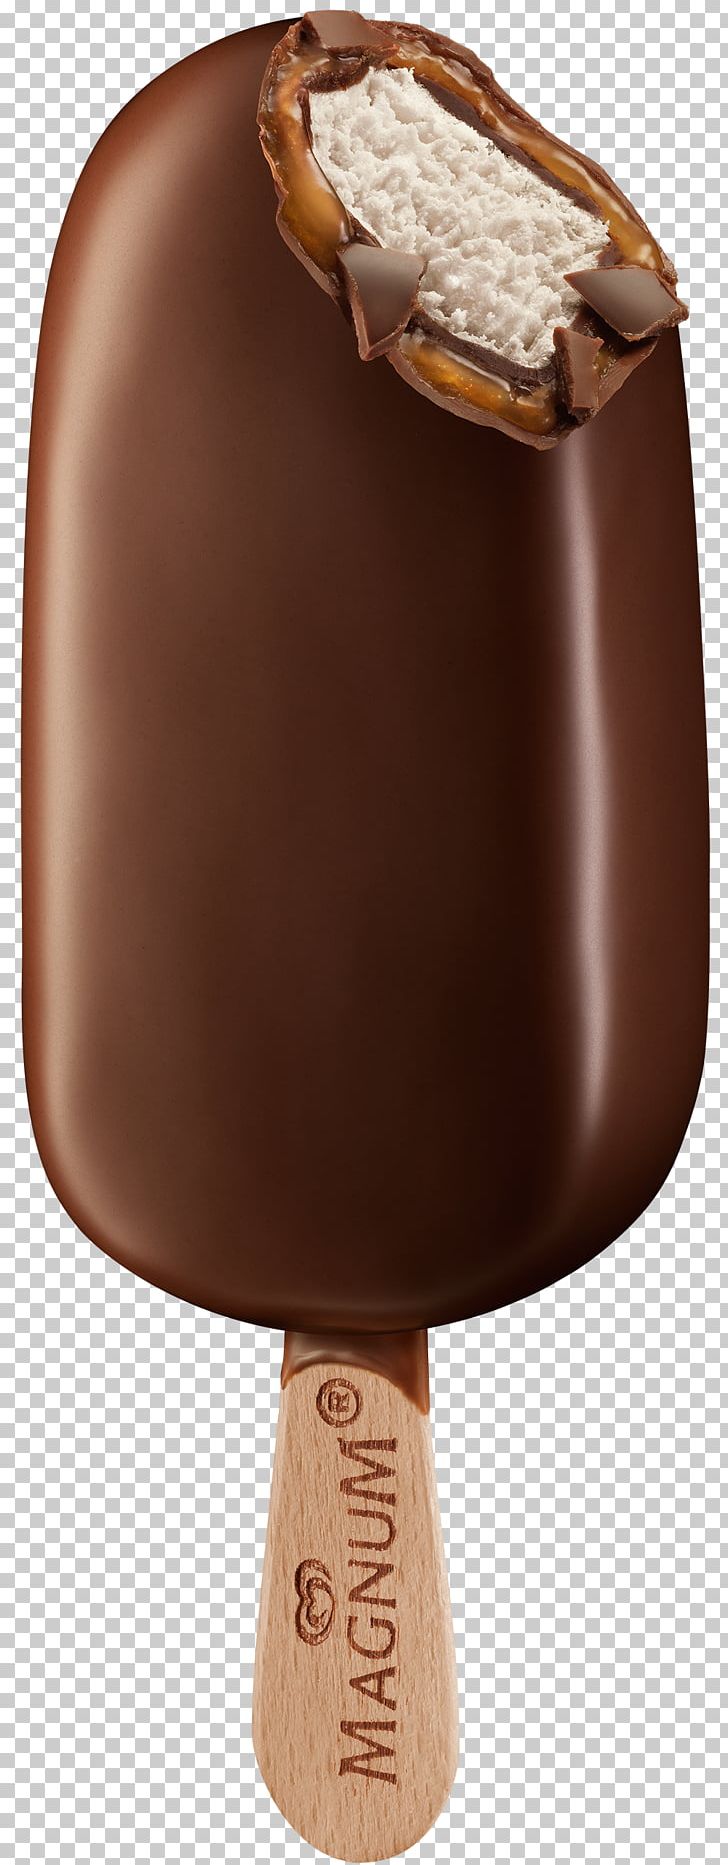 Chocolate Ice Cream Éclair Magnum PNG, Clipart, Chocolate Ice Cream, Eclair, Magnum Ice Cream Free PNG Download